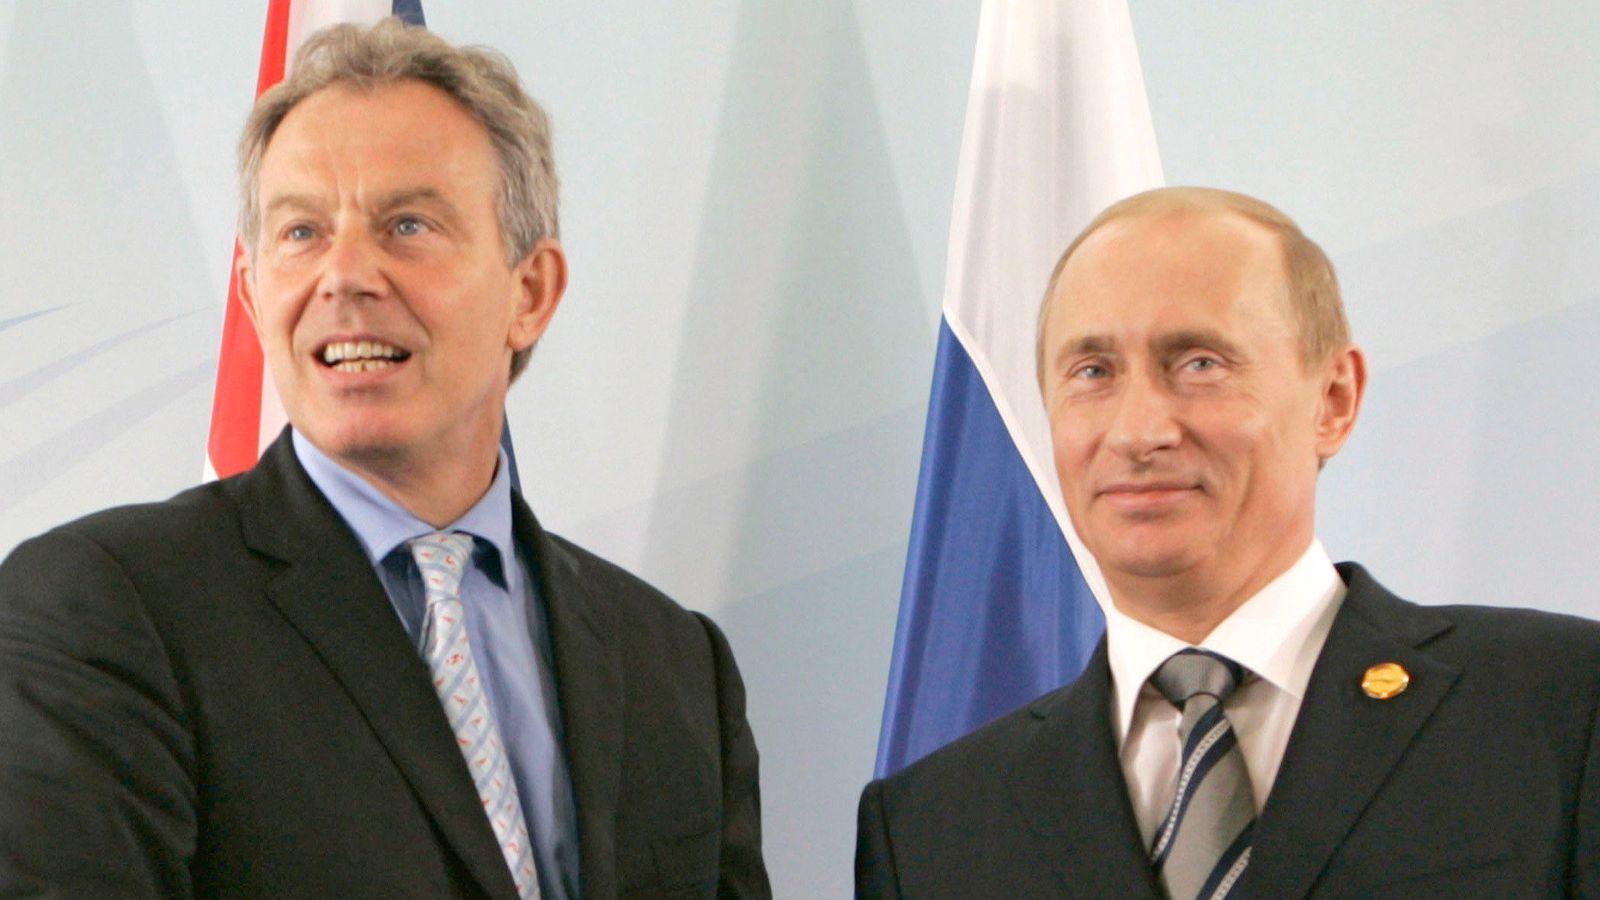 Tony Blair wanted Vladimir Putin at 'top table' while he was PM despite officials' fears